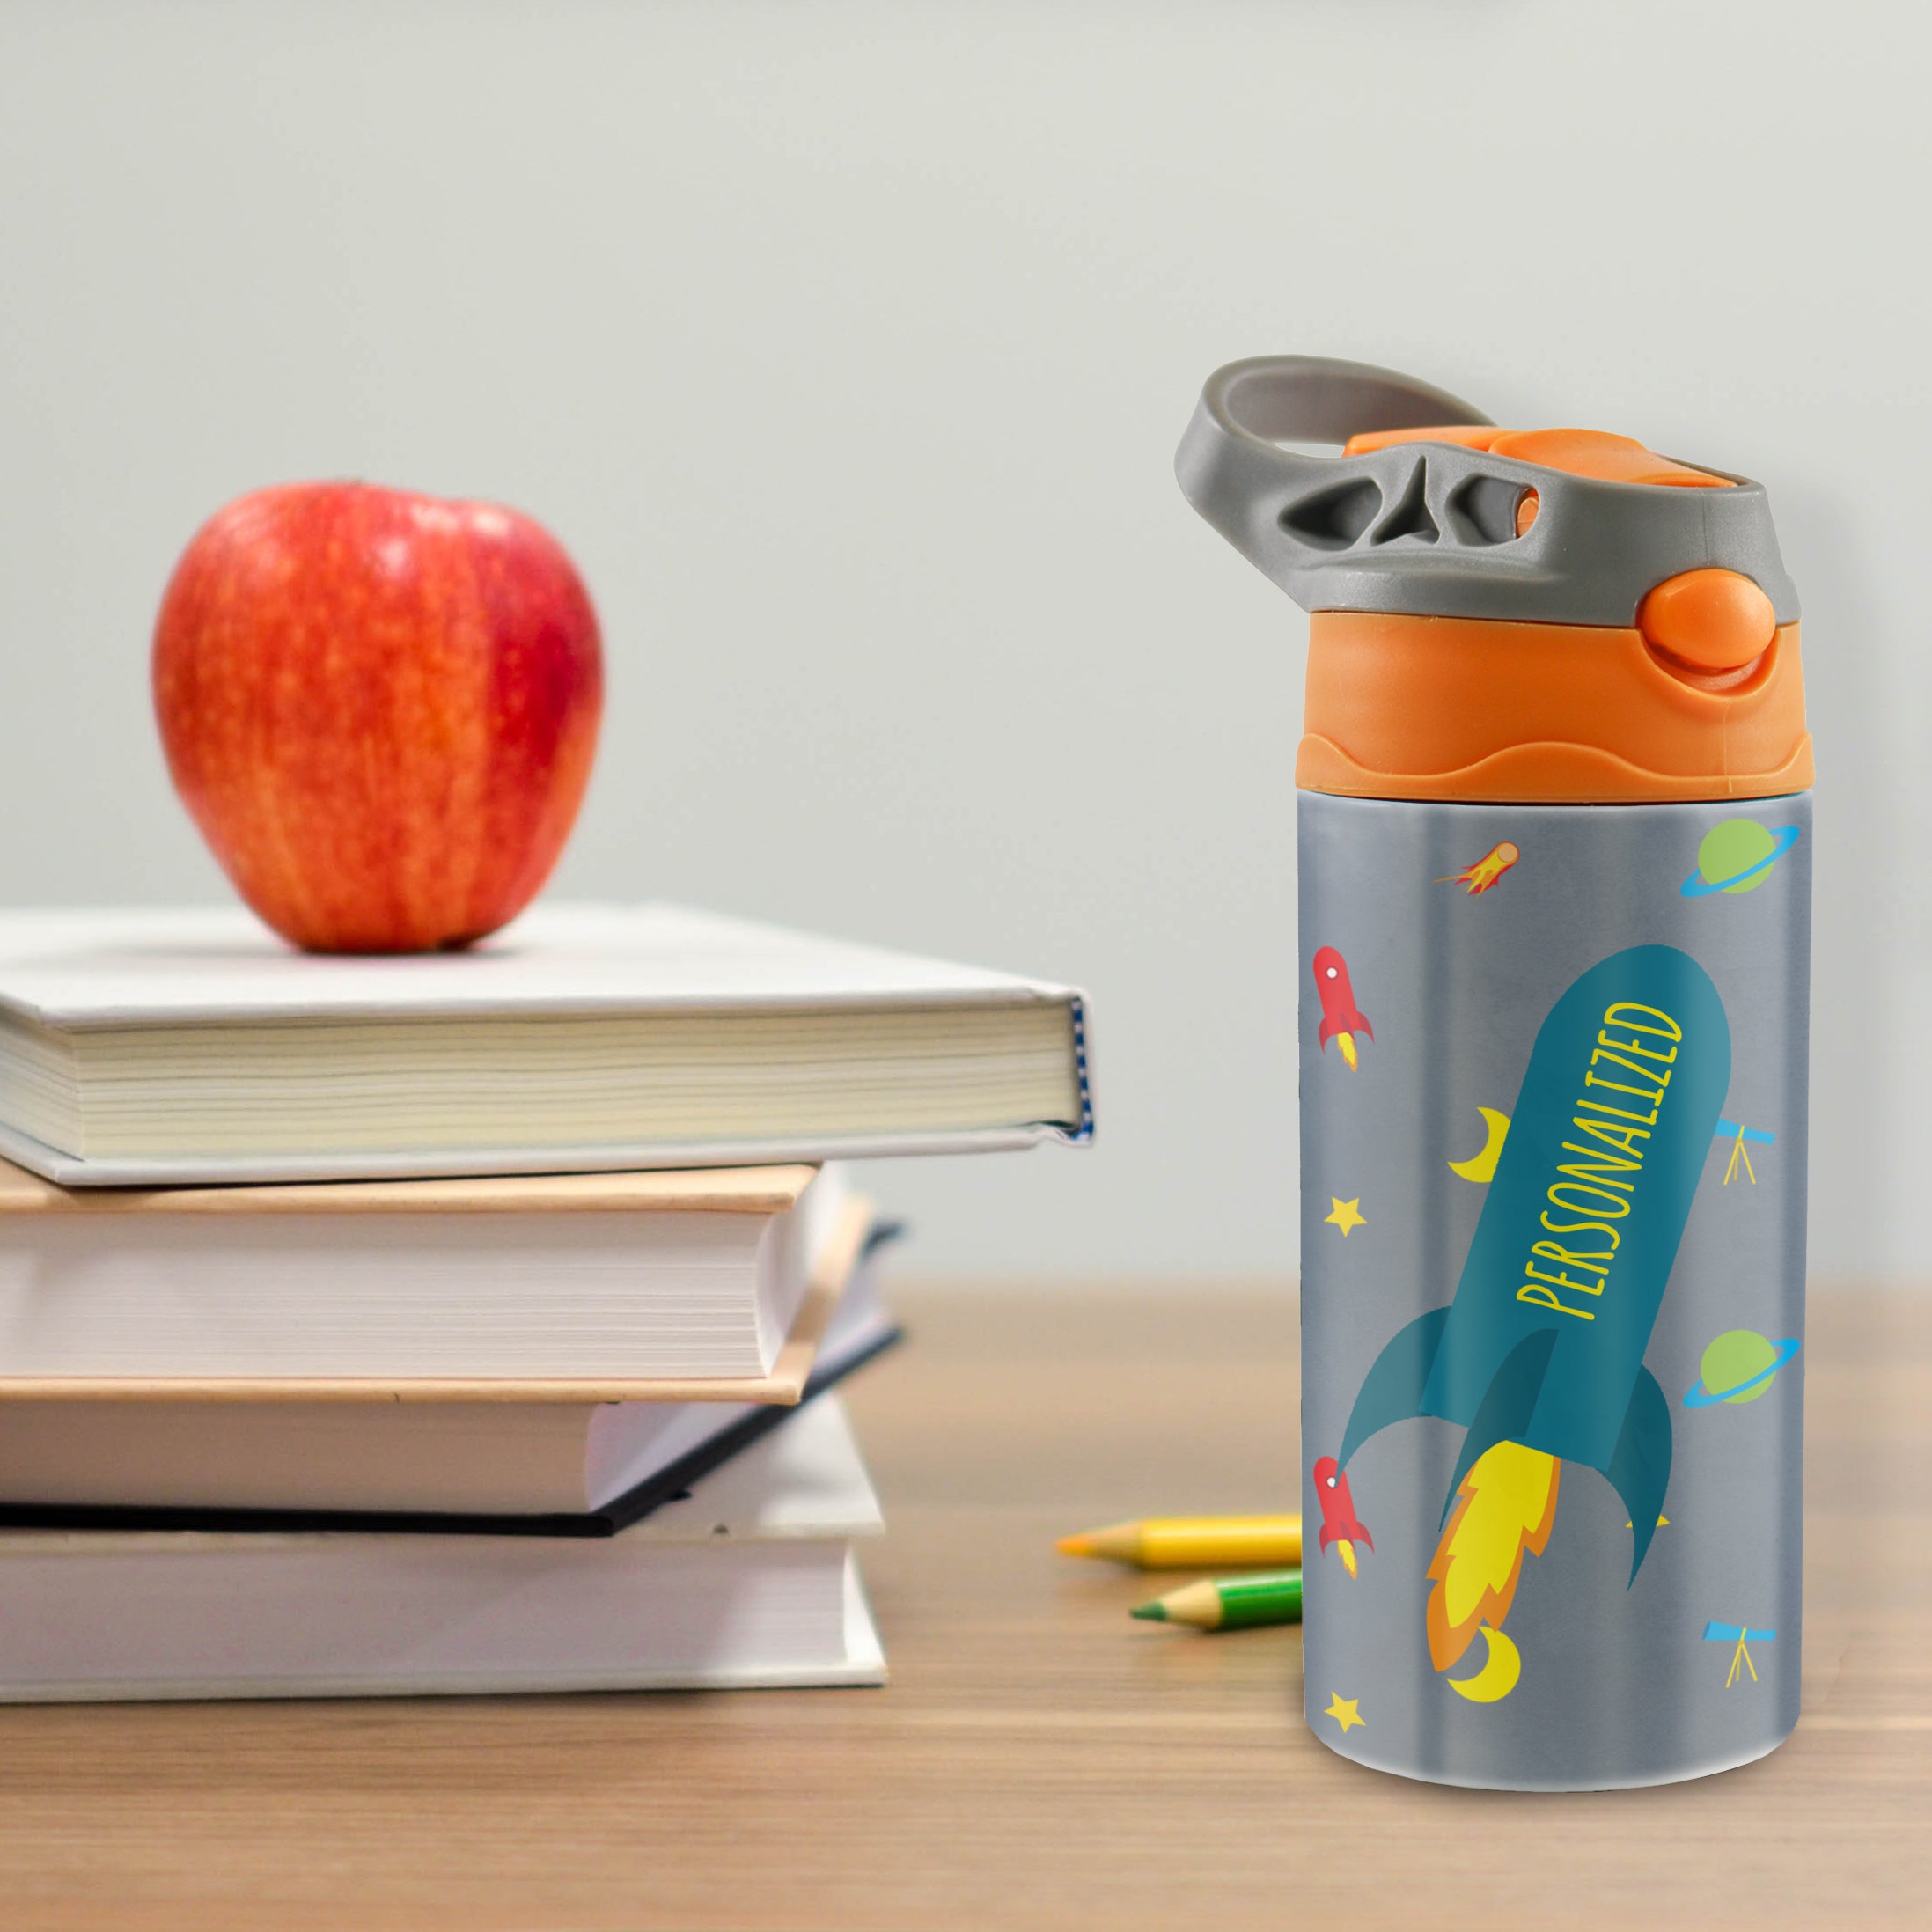 Trend Setters Original (Outer Space - Personalize with Name) 12 oz Stainless Steel Water Bottle with Orange and Grey Lid